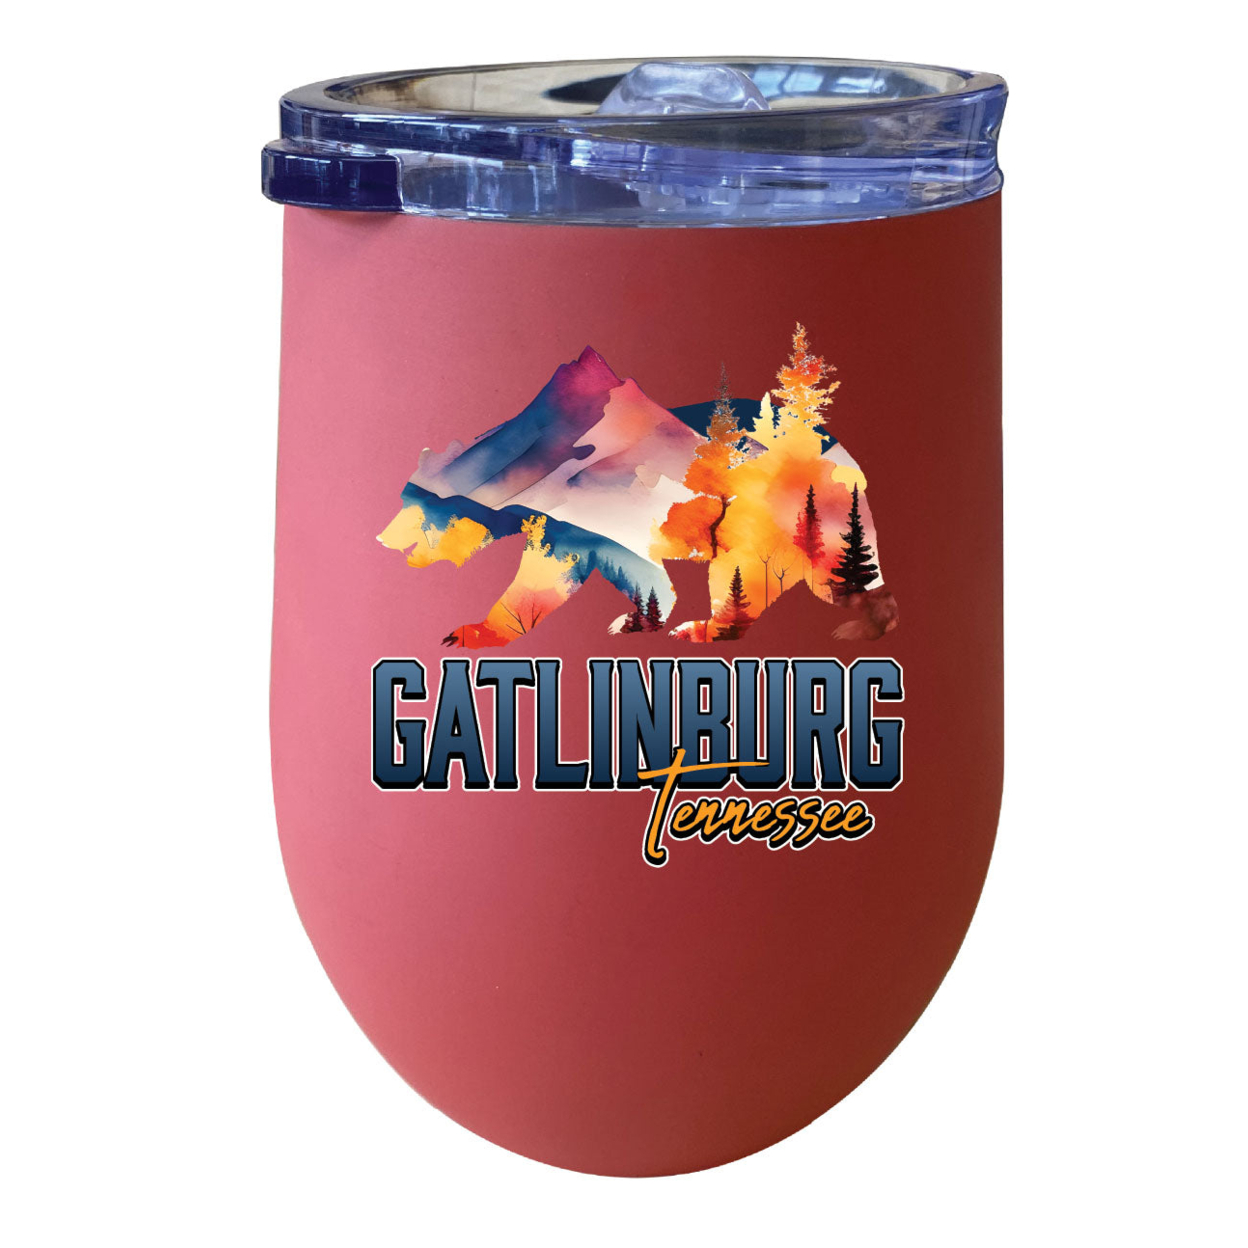 Gatlinburg Tennessee Souvenir 12 Oz Insulated Wine Stainless Steel Tumbler - Coral, B